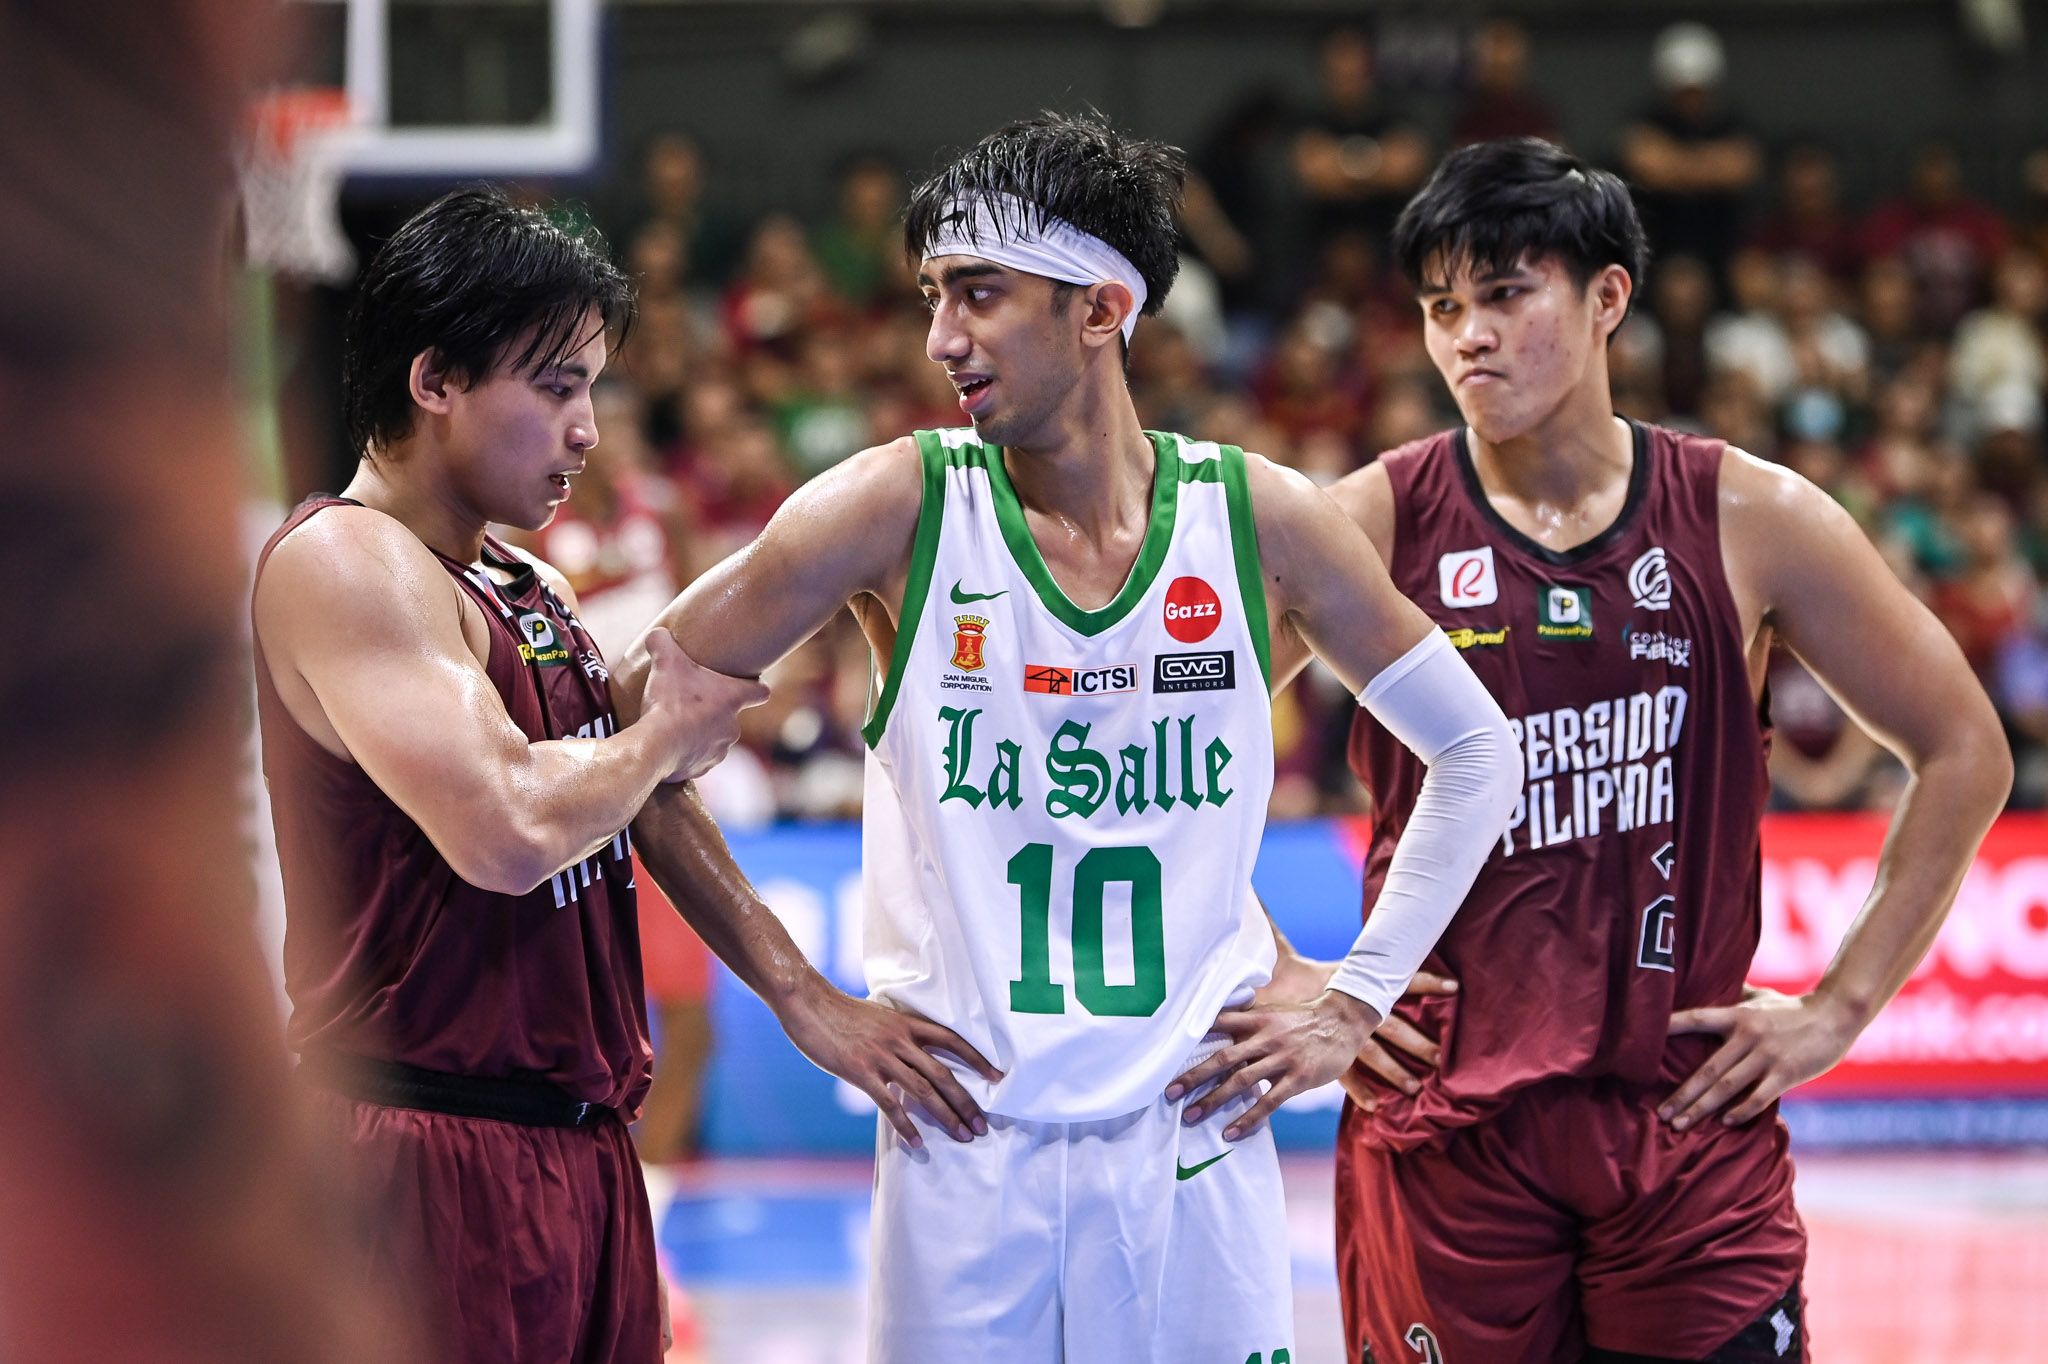 UAAP86-MBB-G2-JD-Cagulangan-Evan-Nelle-Reyland-Torres-2875 Topex never lost faith in Nelle despite rough shooting: 'Evan is one of our leaders' Basketball DLSU News UAAP  - philippine sports news